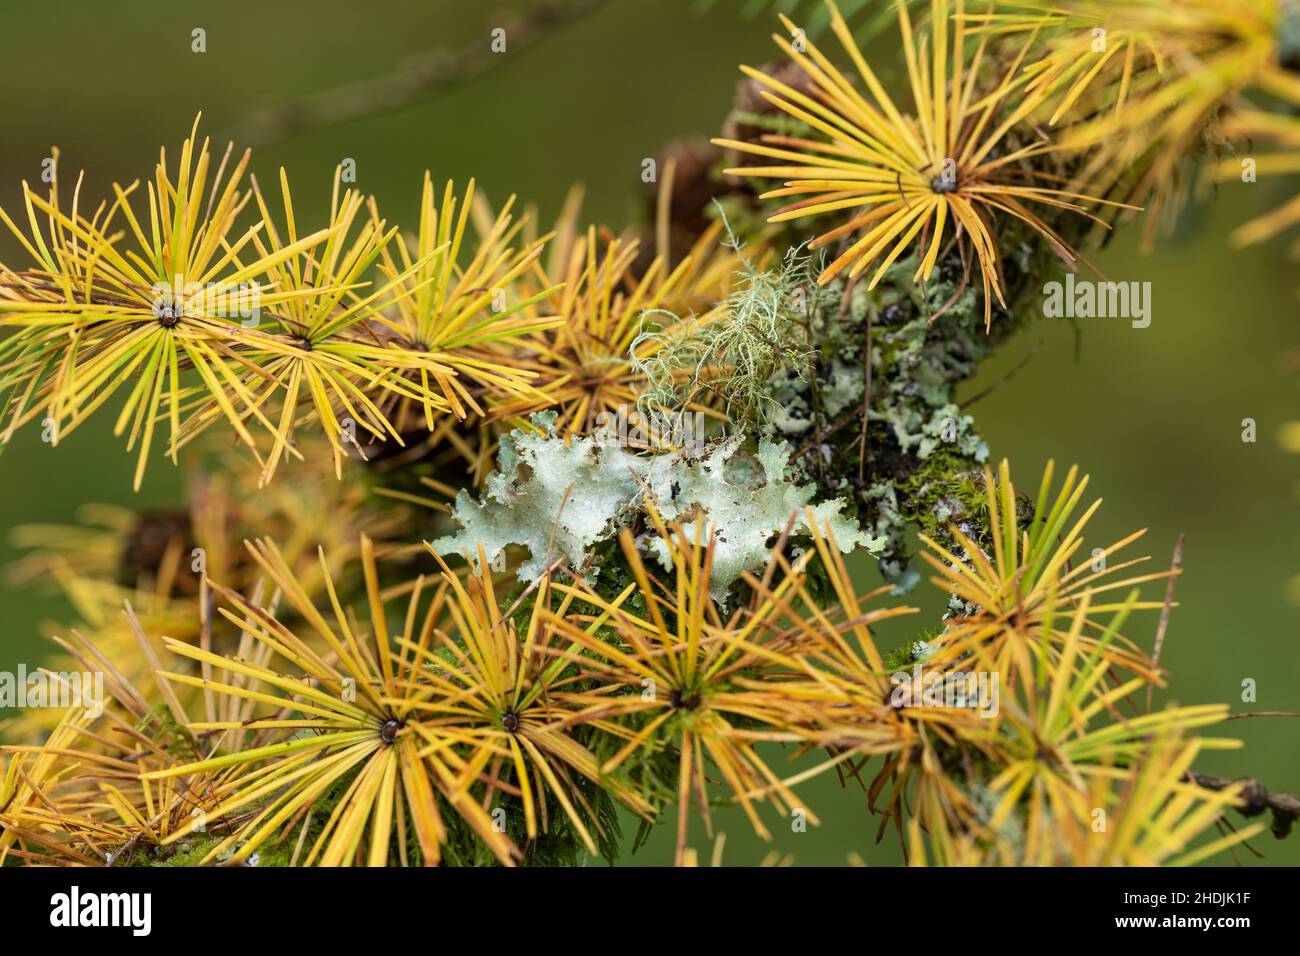 Close up of lichen growing on the branch of a Japanese larch Larix kaempferi tree in Autumn at Westonbirt Arboretum, Gloucestershire, UK Stock Photo